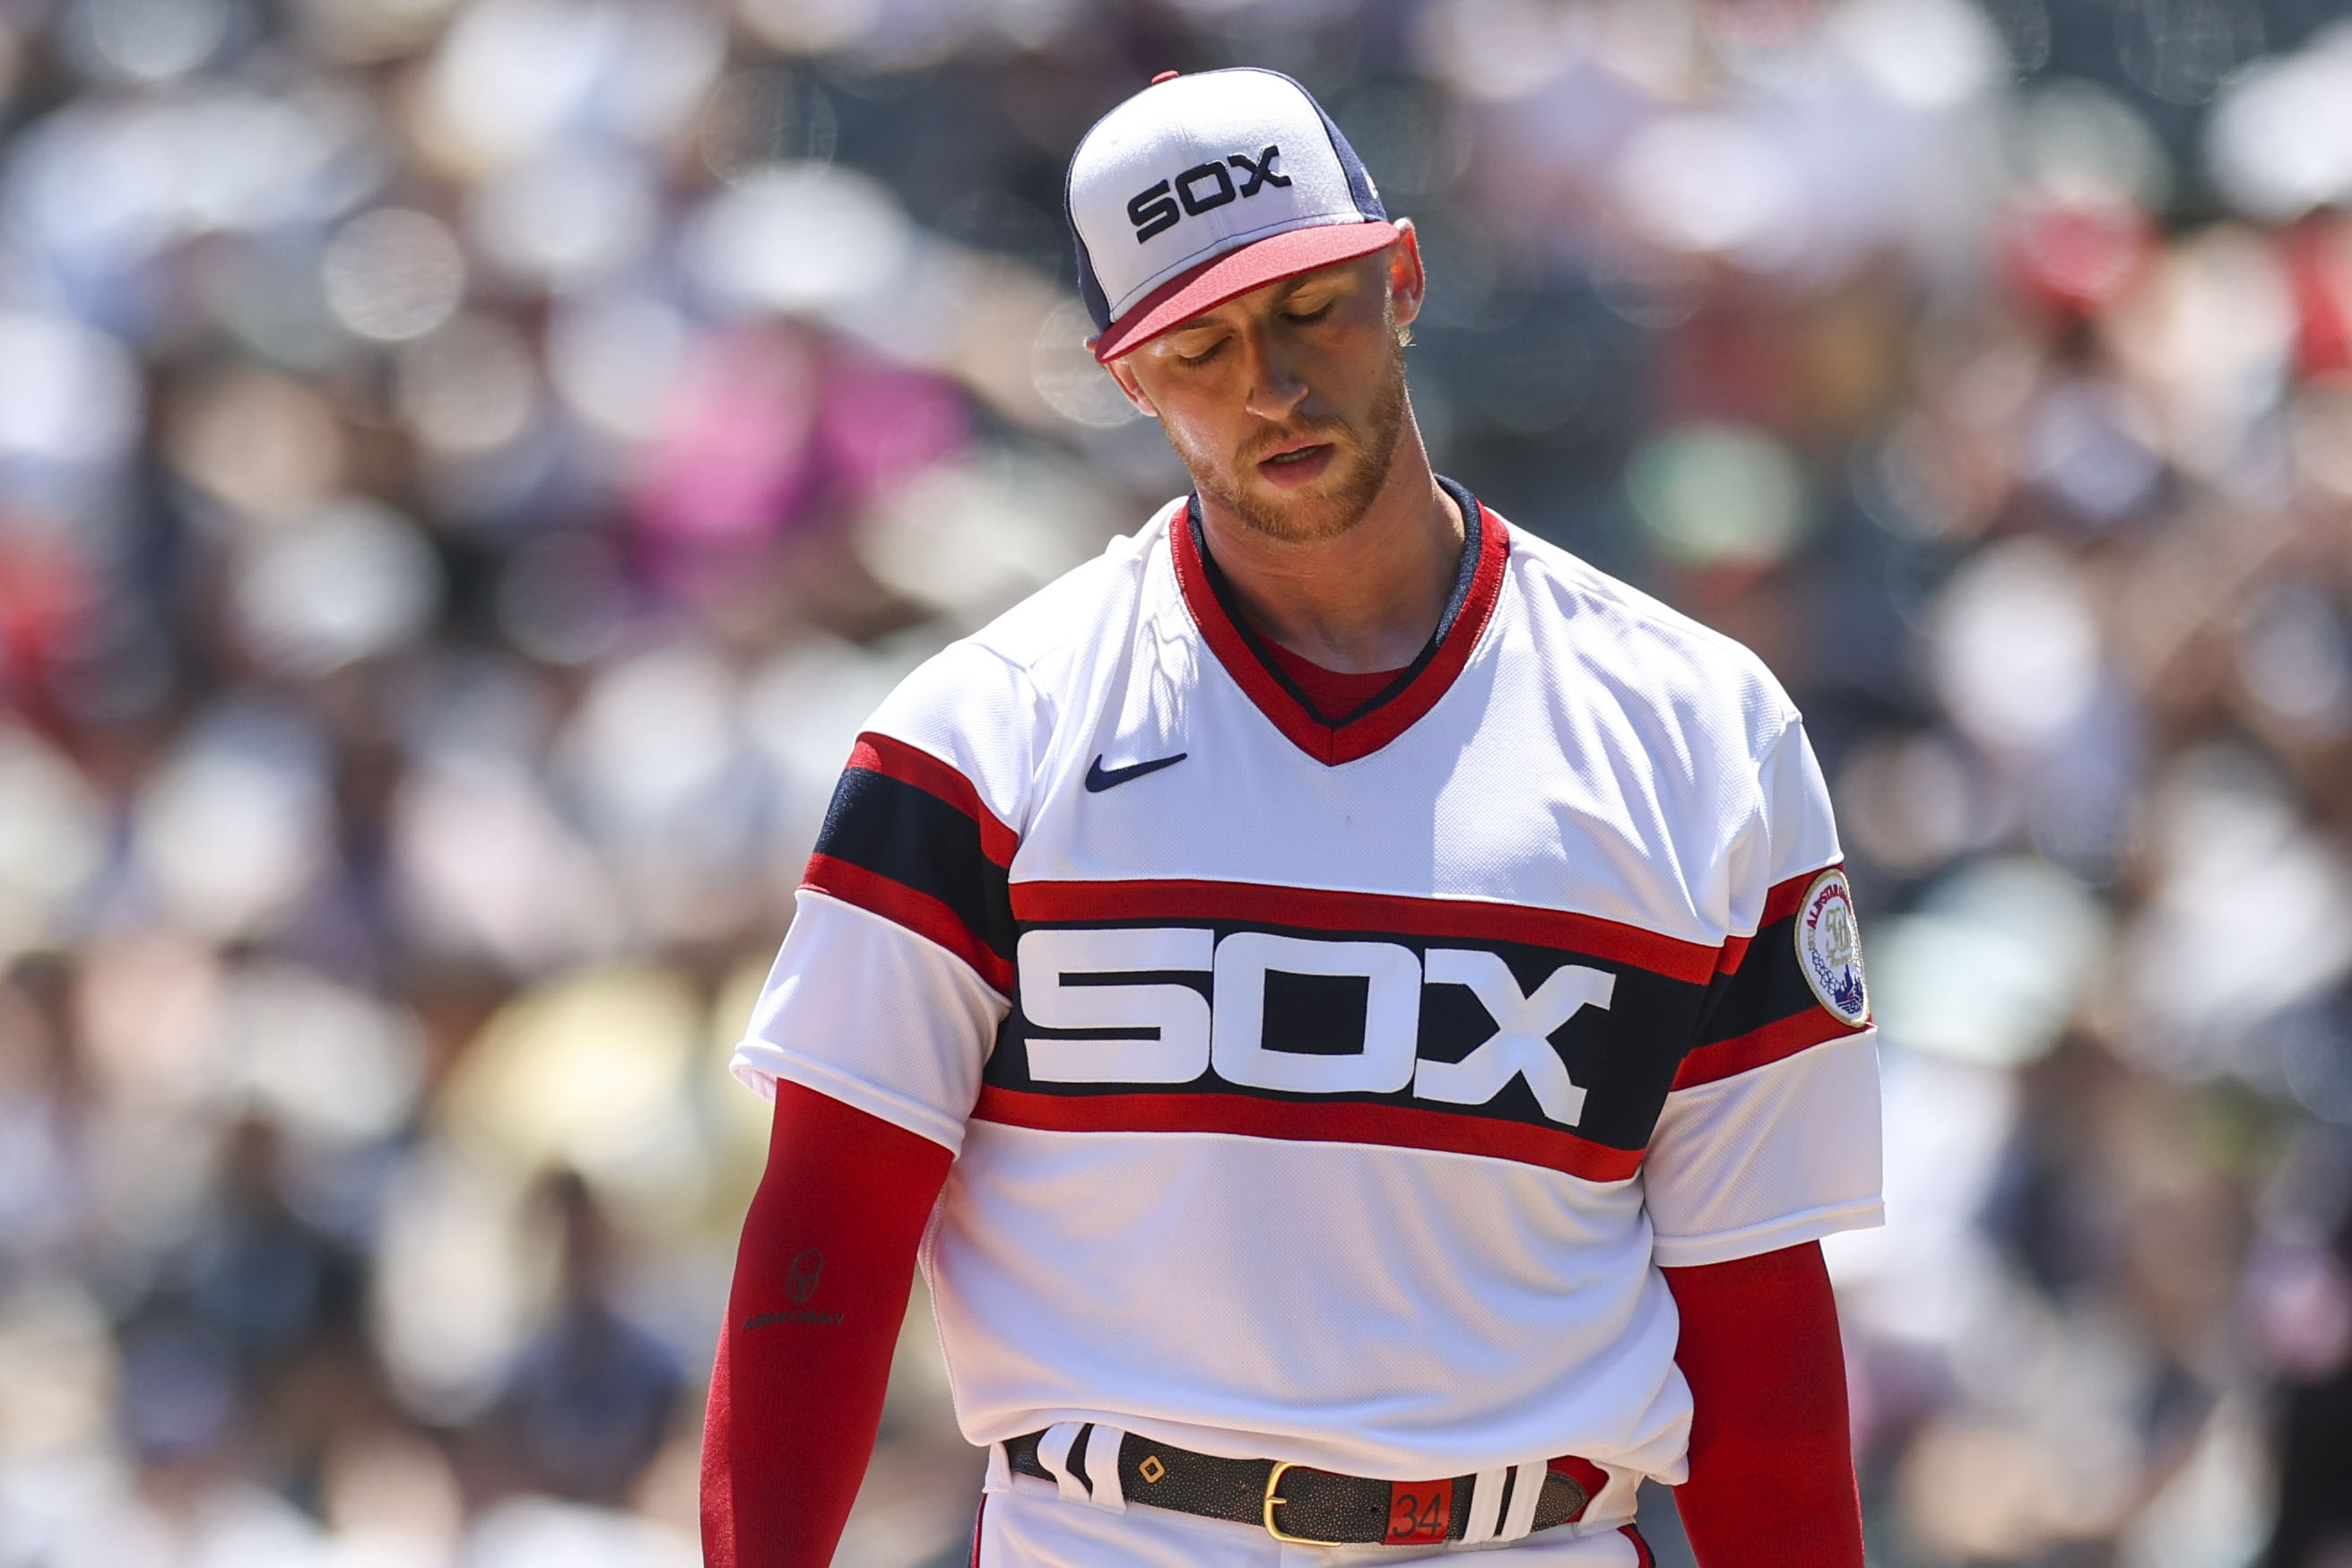 Michael Kopech inconsistent in start for White Sox vs. Guardians